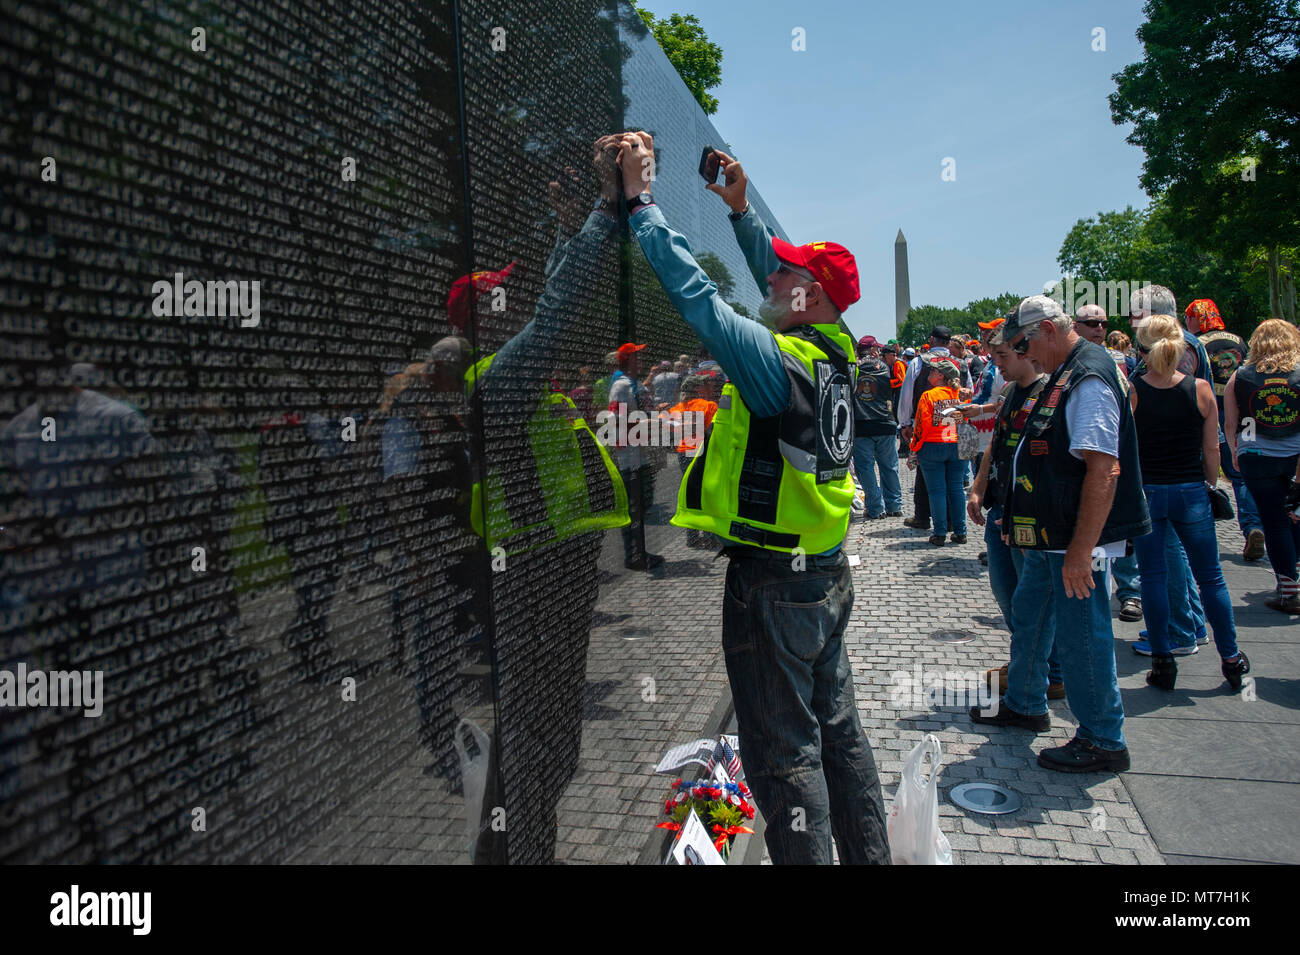 USA Washington DC Vietnam War Memorial Wall People come to grieve and remember loved ones and bring items to honor them Stock Photo